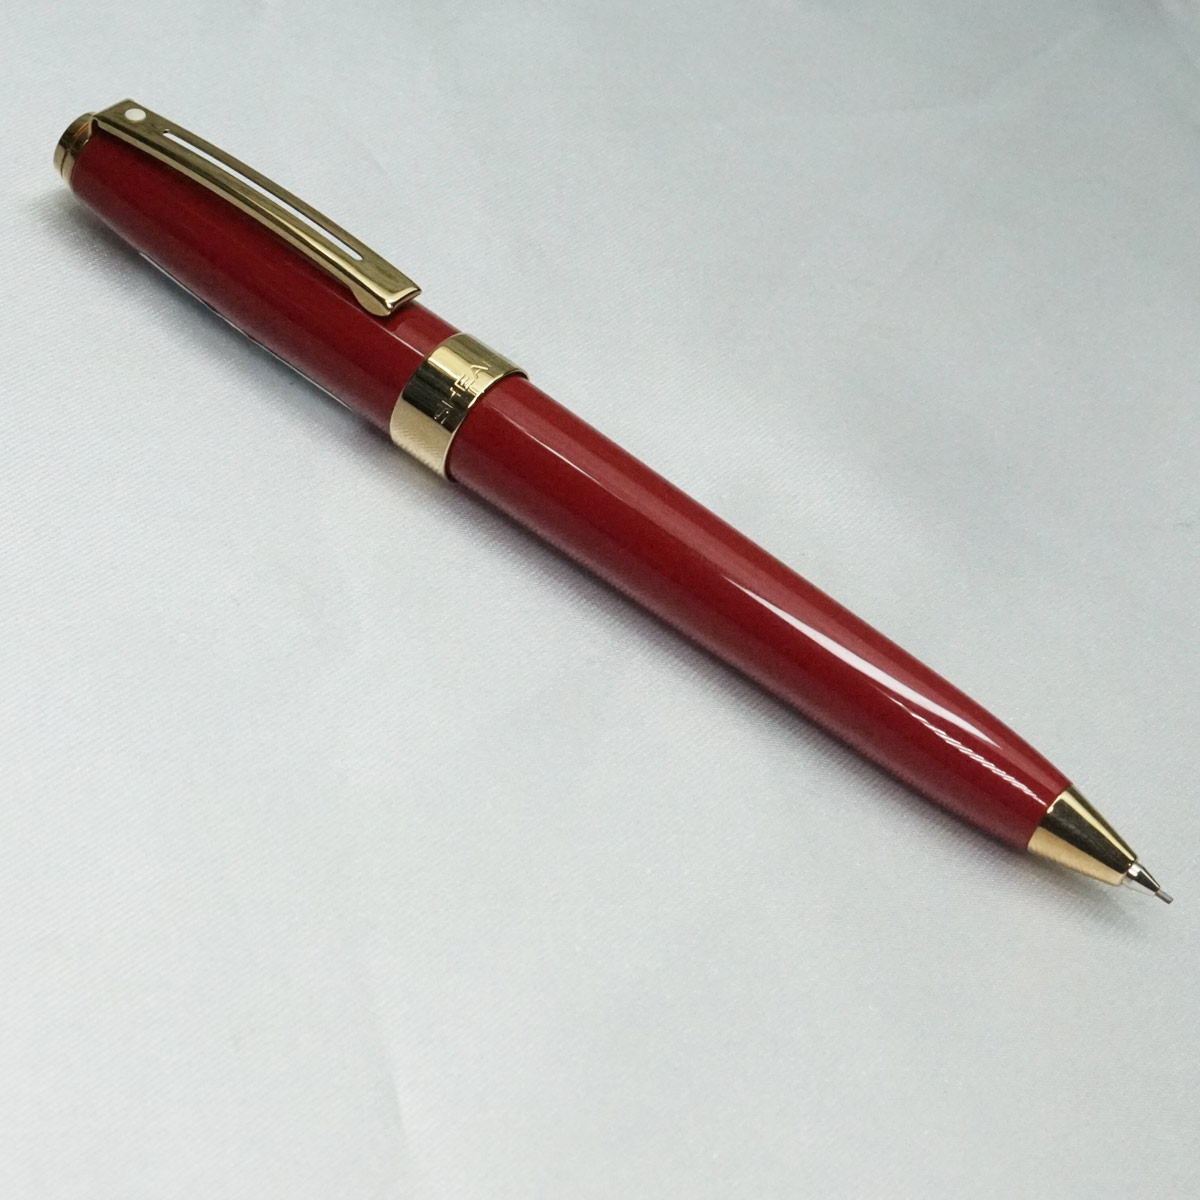 Sheaffer Prelude Red color body and Cap with Gold Trims Mechanical Pencil 0.5mm SKU 21812